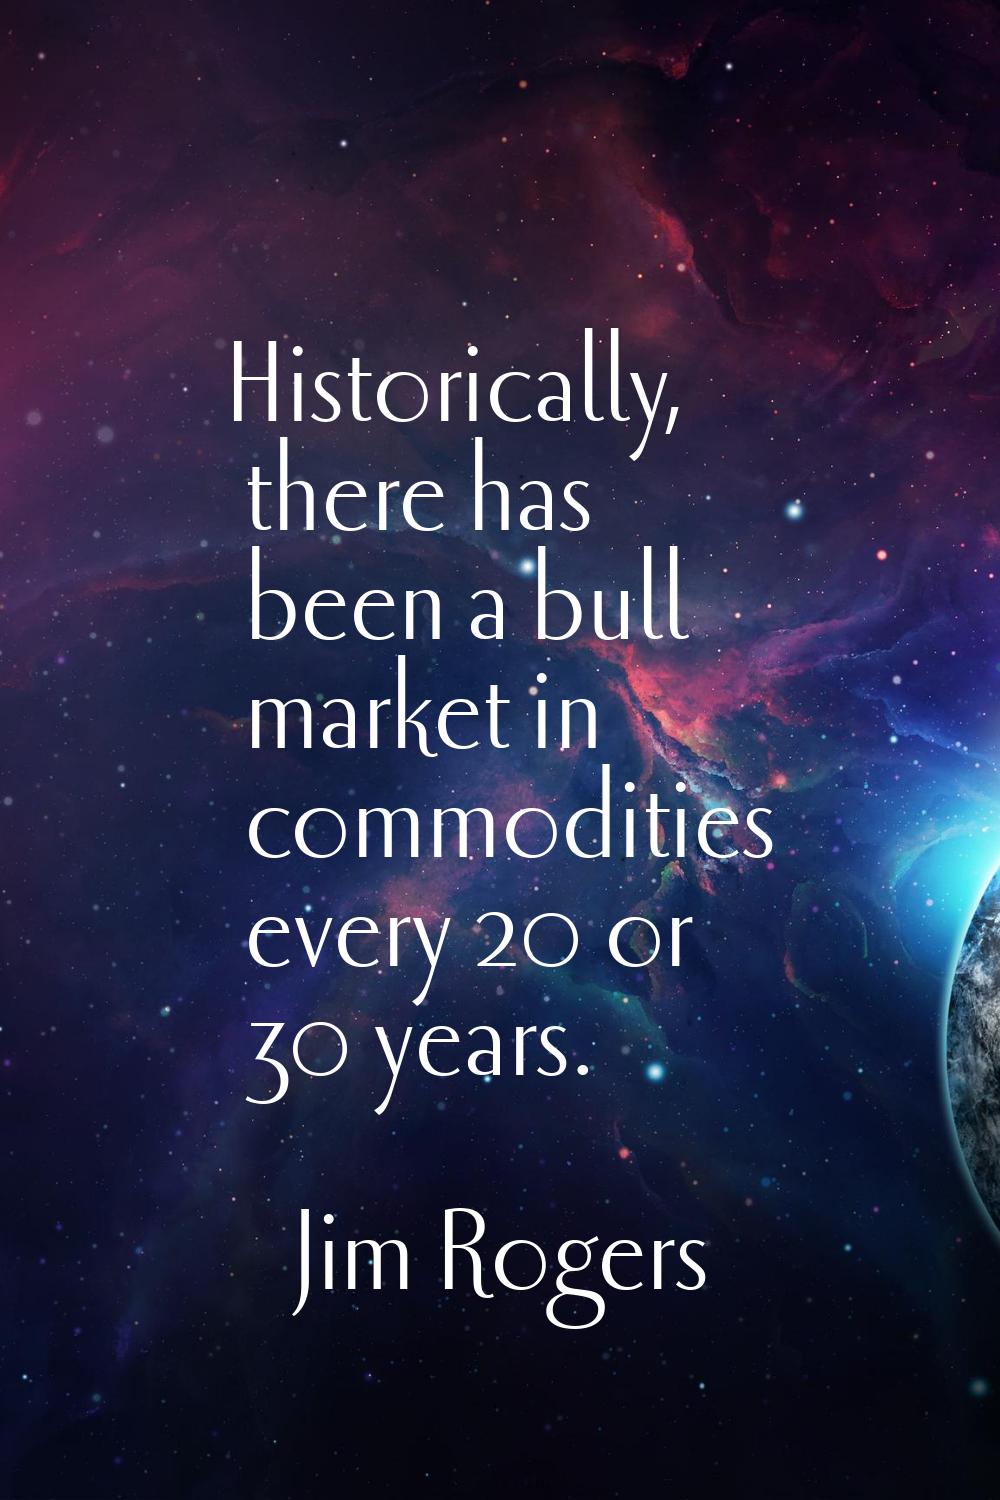 Historically, there has been a bull market in commodities every 20 or 30 years.